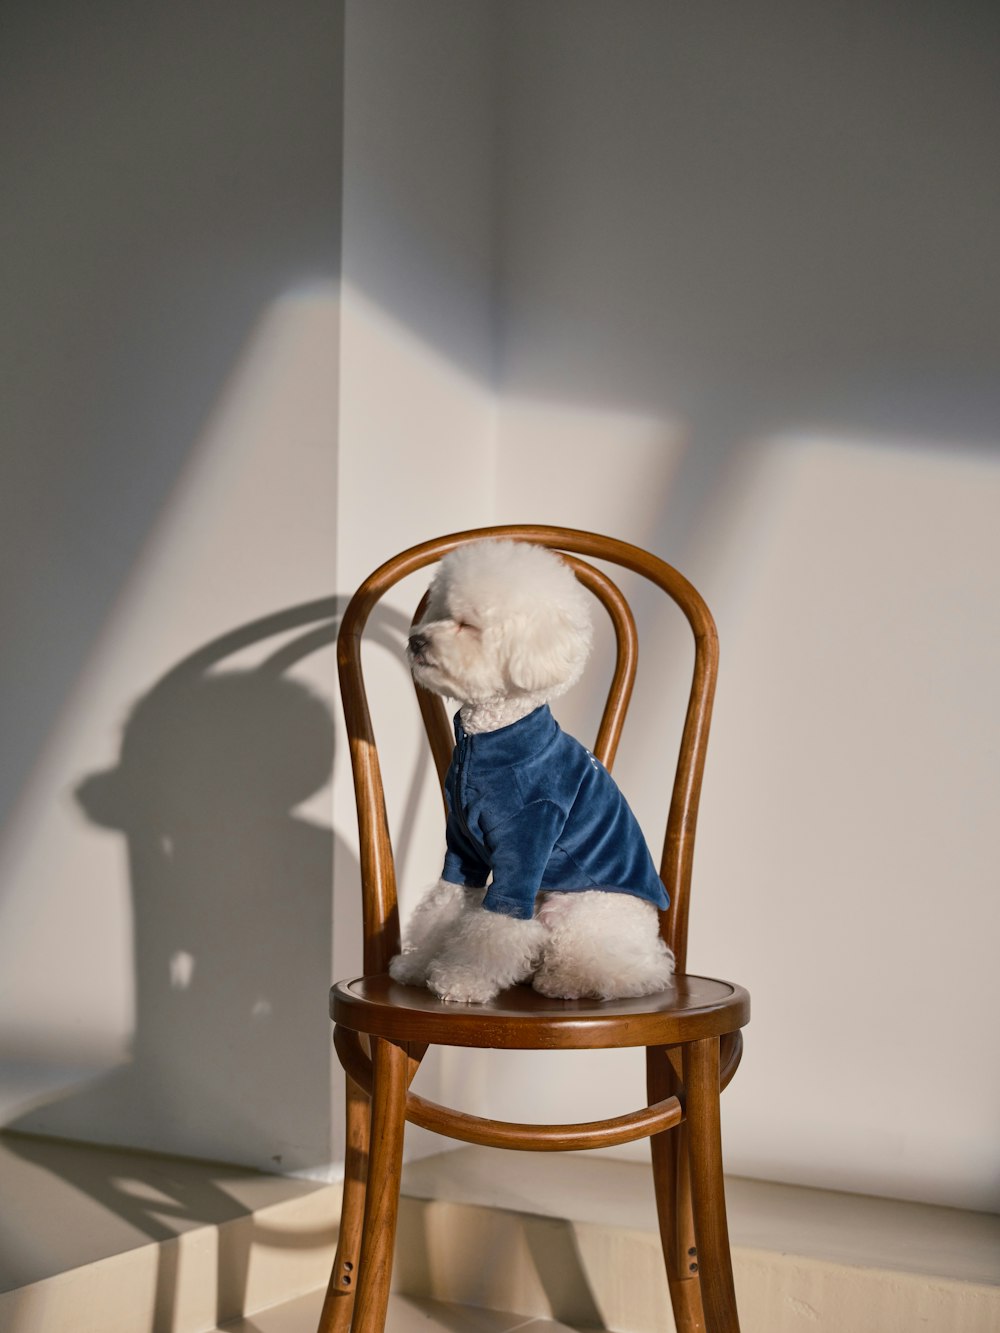 a small white dog wearing a blue shirt sitting on a wooden chair